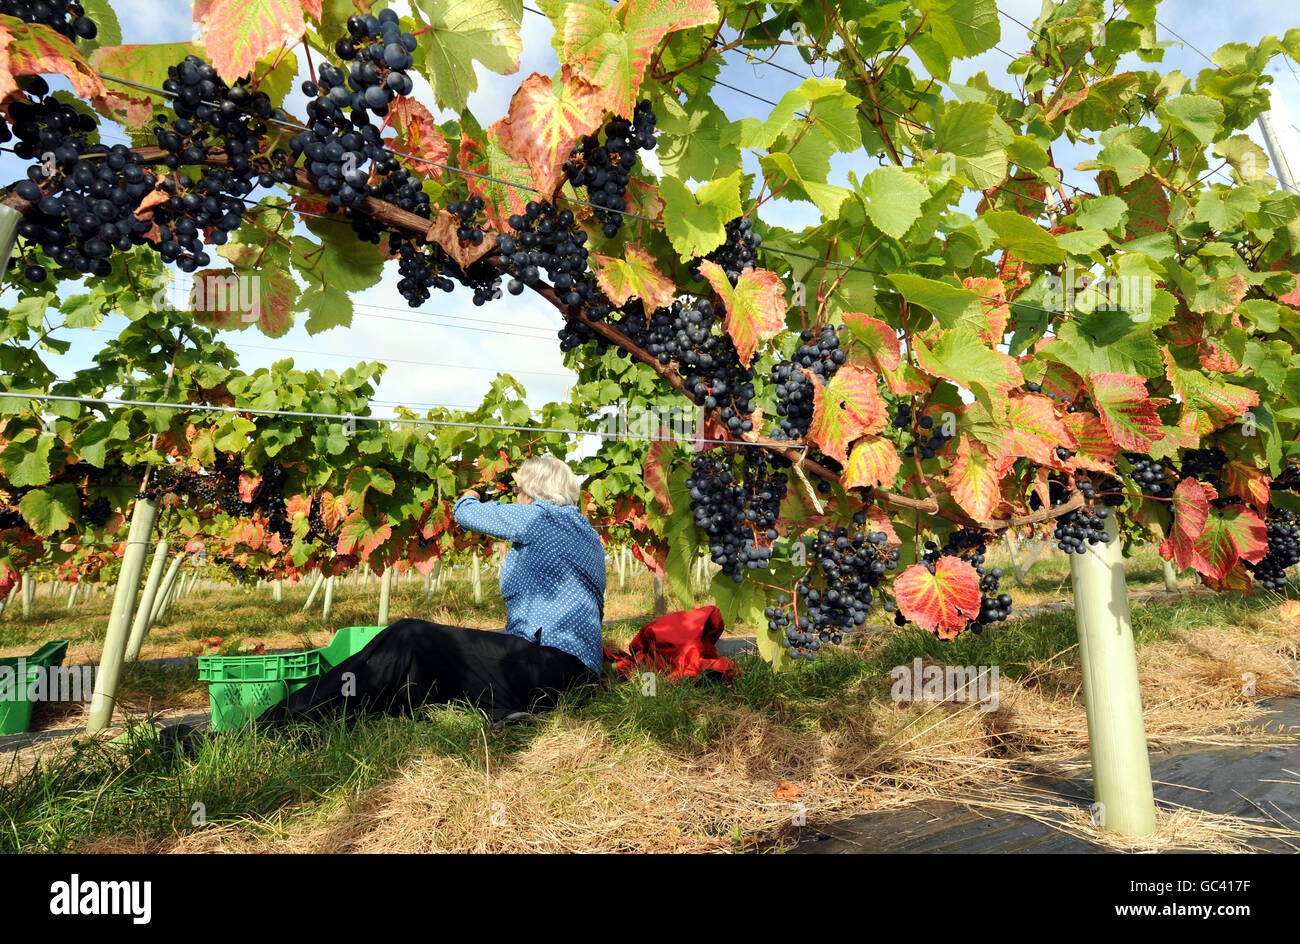 Pickers gather grapes at Ryedale Vineyard in Westow near York. England's most northerly commercial producer, Stuart Smith said he hoped to produce 3,000 bottles of white and rose wine this year compared to 450 last year and eventually increase this output to 20,000 in five years' time. Stock Photo